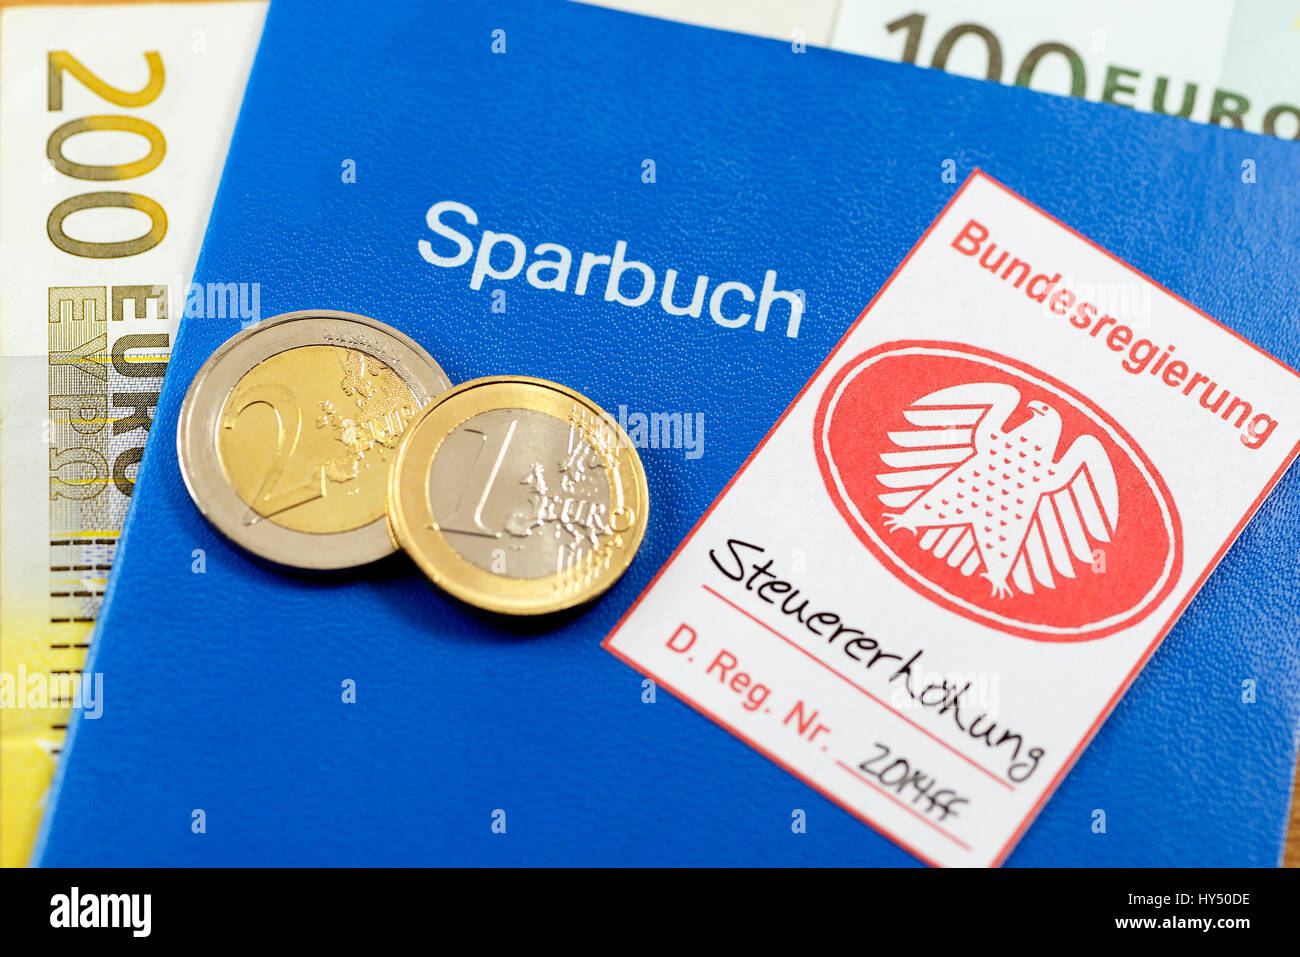 Security seal with federal eagle on savings book, symbolic photo tax rise, Pfandsiegel mit Bundesadler auf Sparbuch, Symbolfoto Steuererhoehung Stock Photo